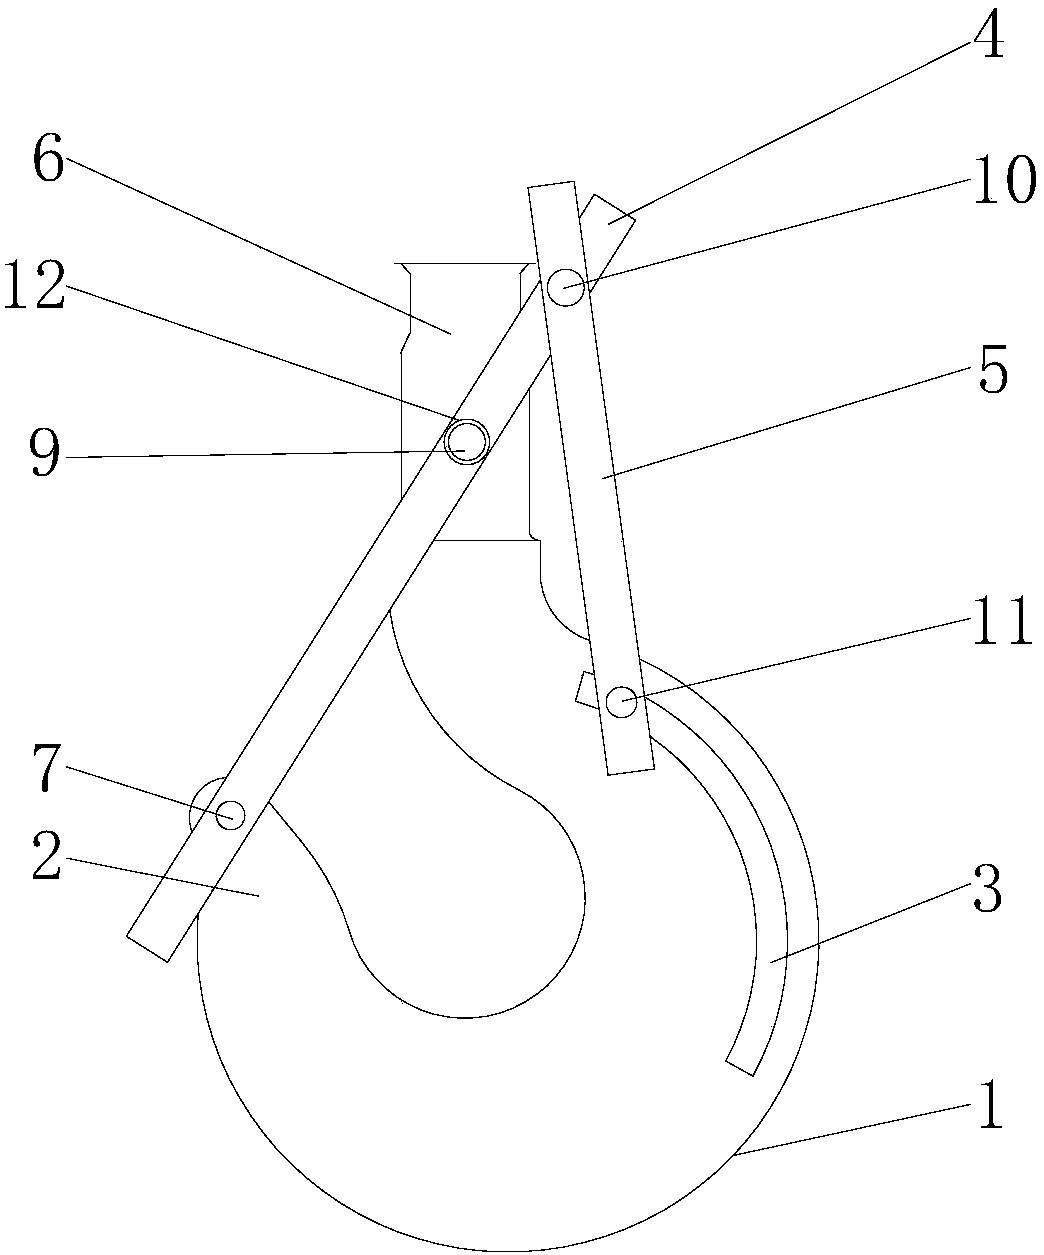 Lifting hook for lifting objects